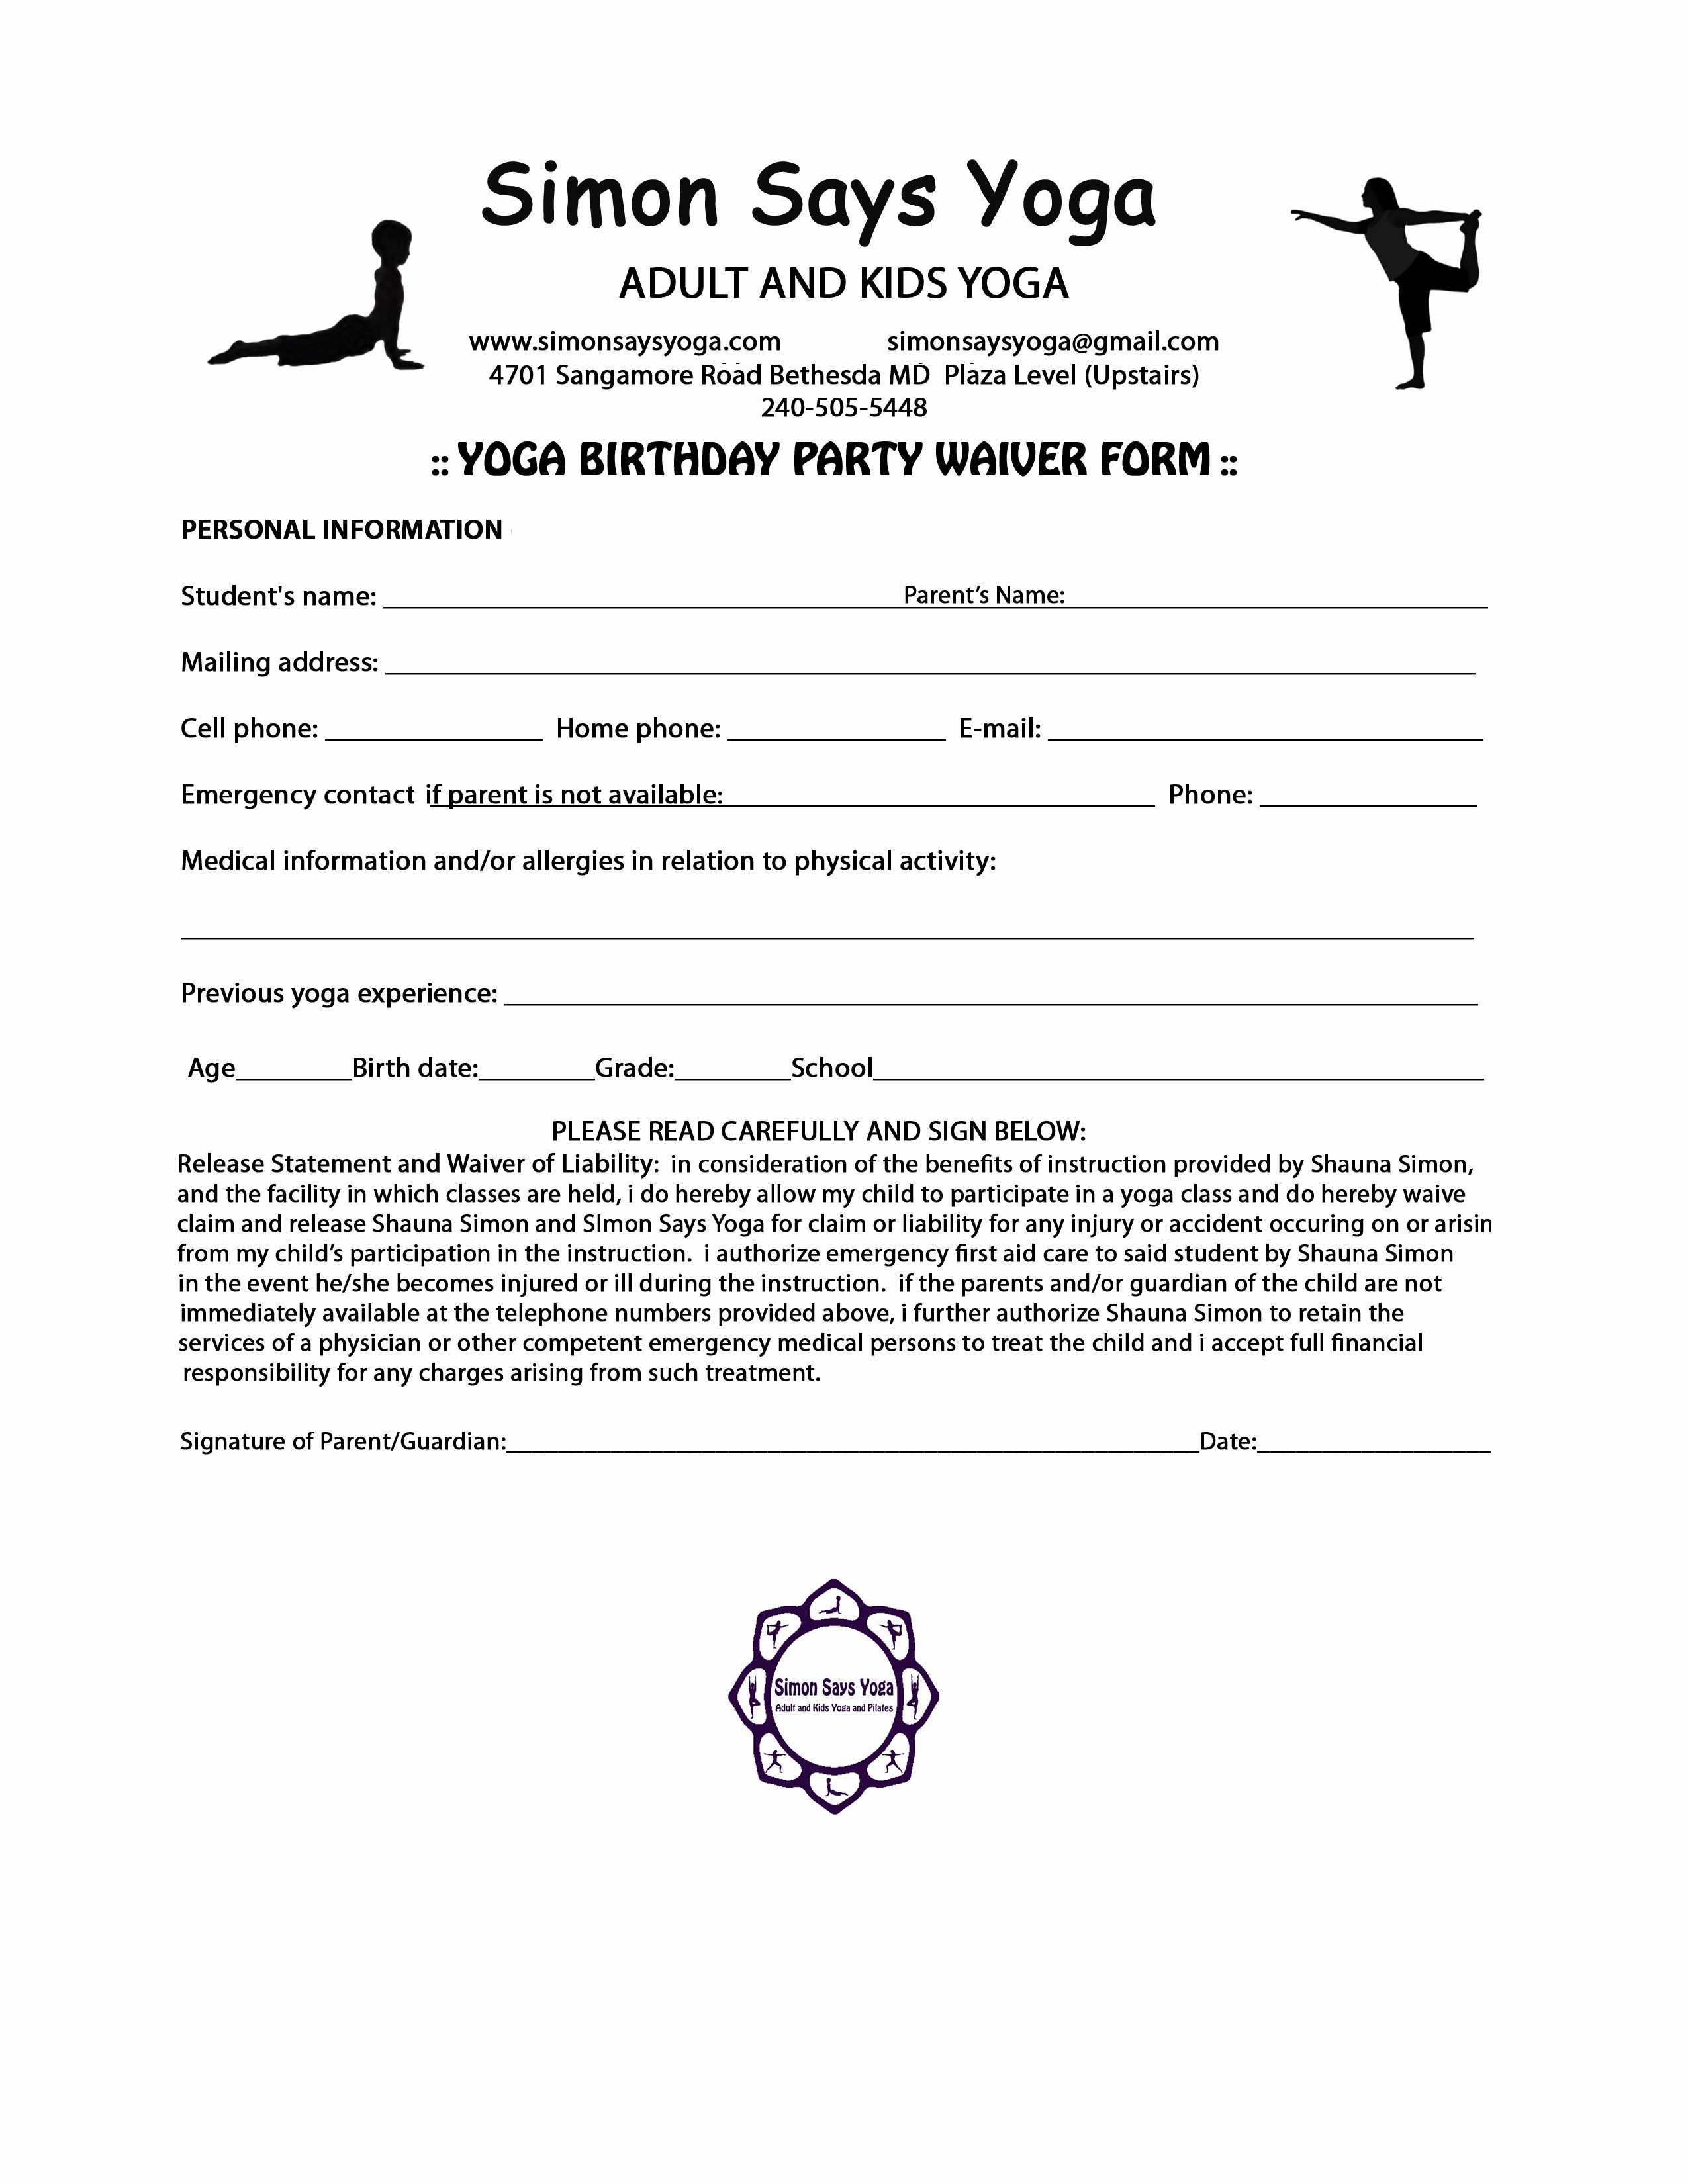 Yoga Waiver form Template Fresh Index Of Images